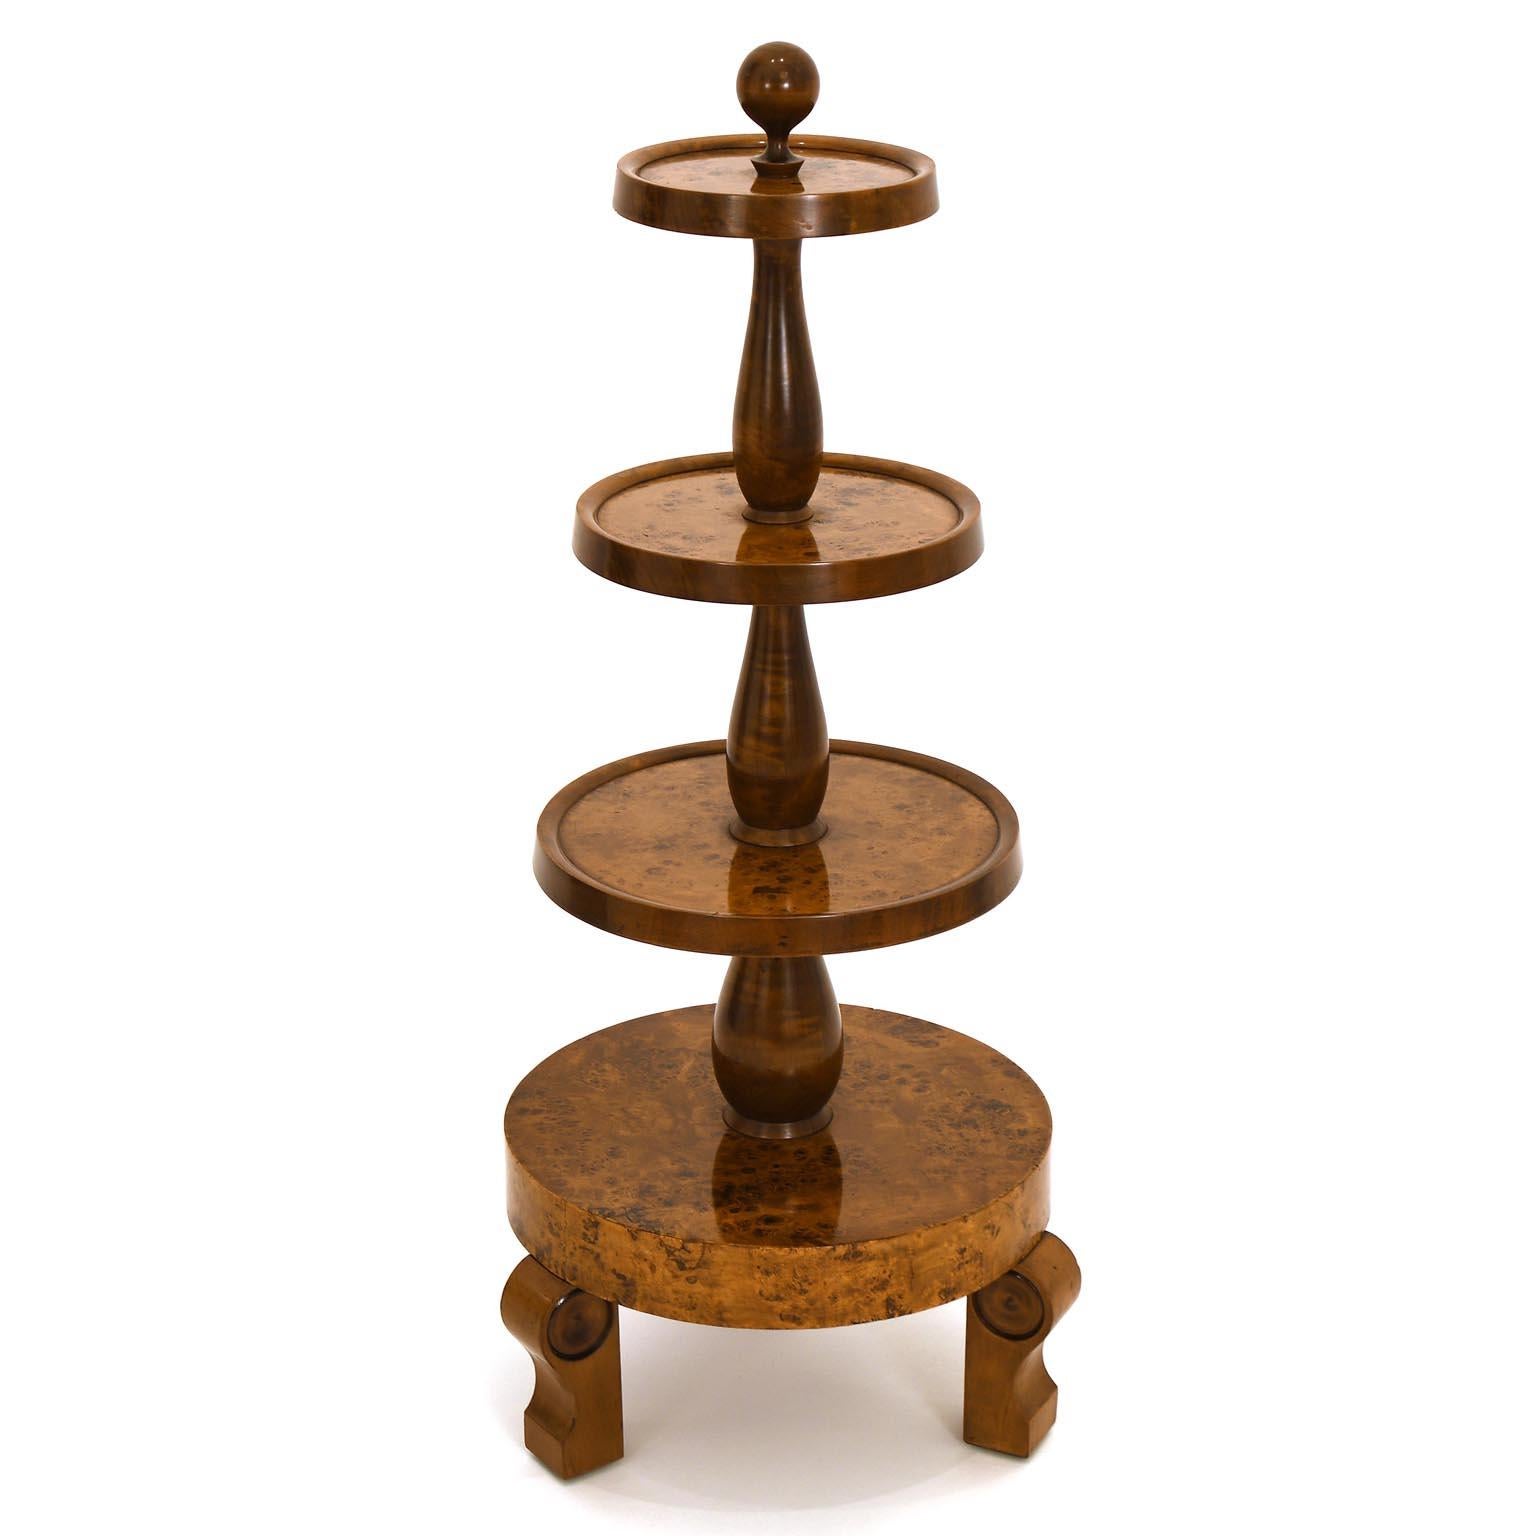 Fine 4-tier étagère from 1920 made of mahogany and stained bird´s-eye maple. The wooden base is polished with schellac.
The heights of the levels are 22 cm, 45 cm, 68 cm and 91 cm, the diameters of the levels are 39 cm, 33 cm, 27 cm and 21 cm.
We